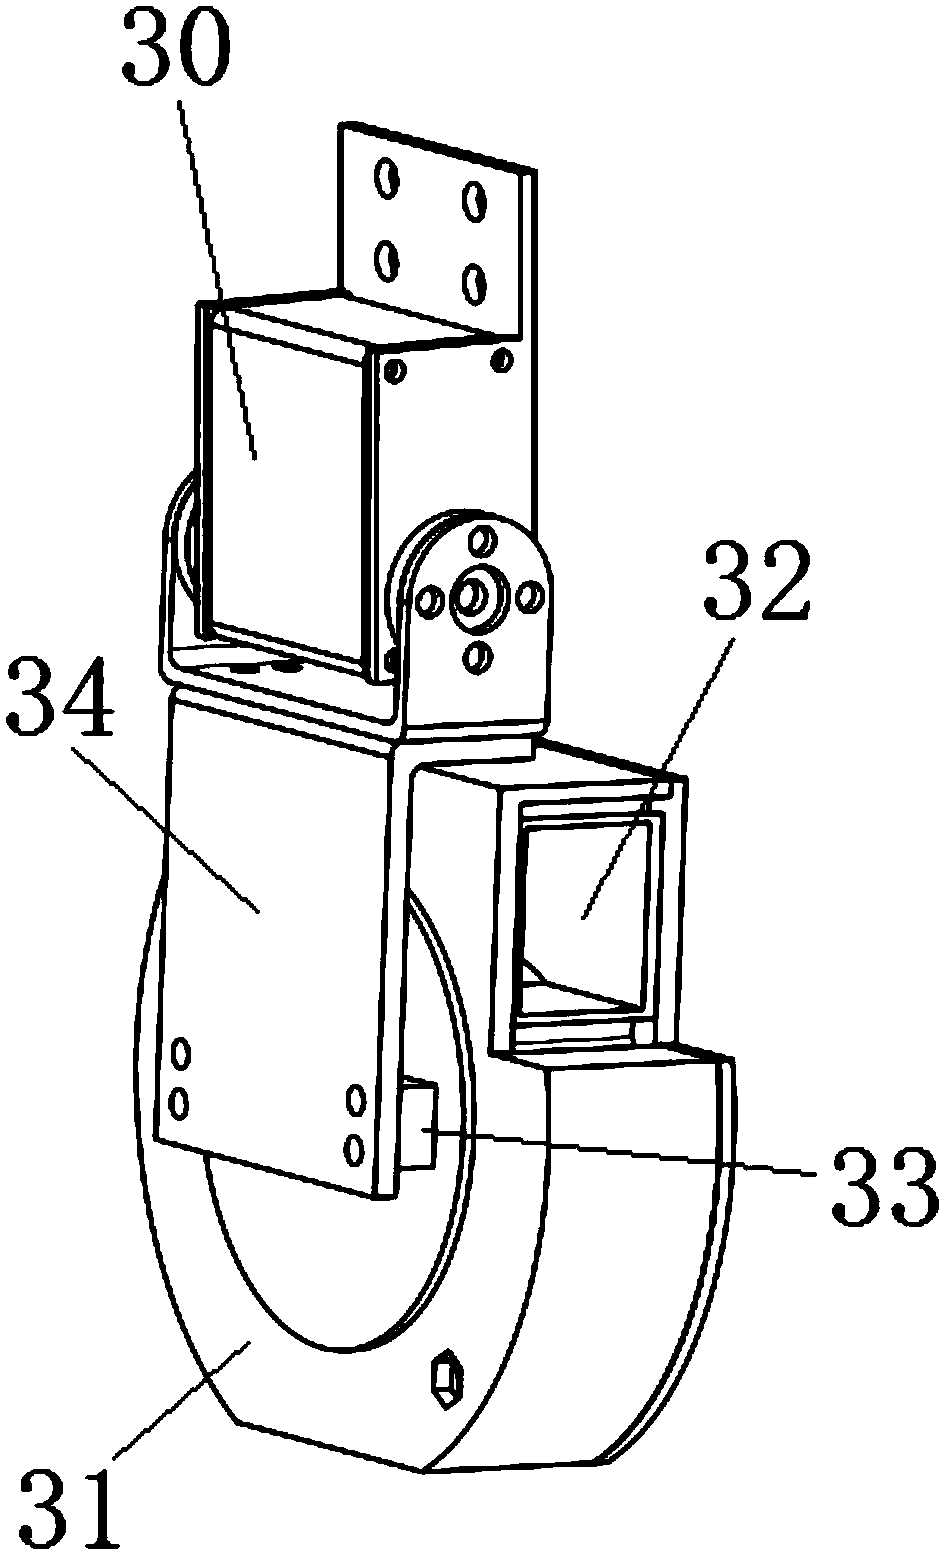 An automatic page turning device